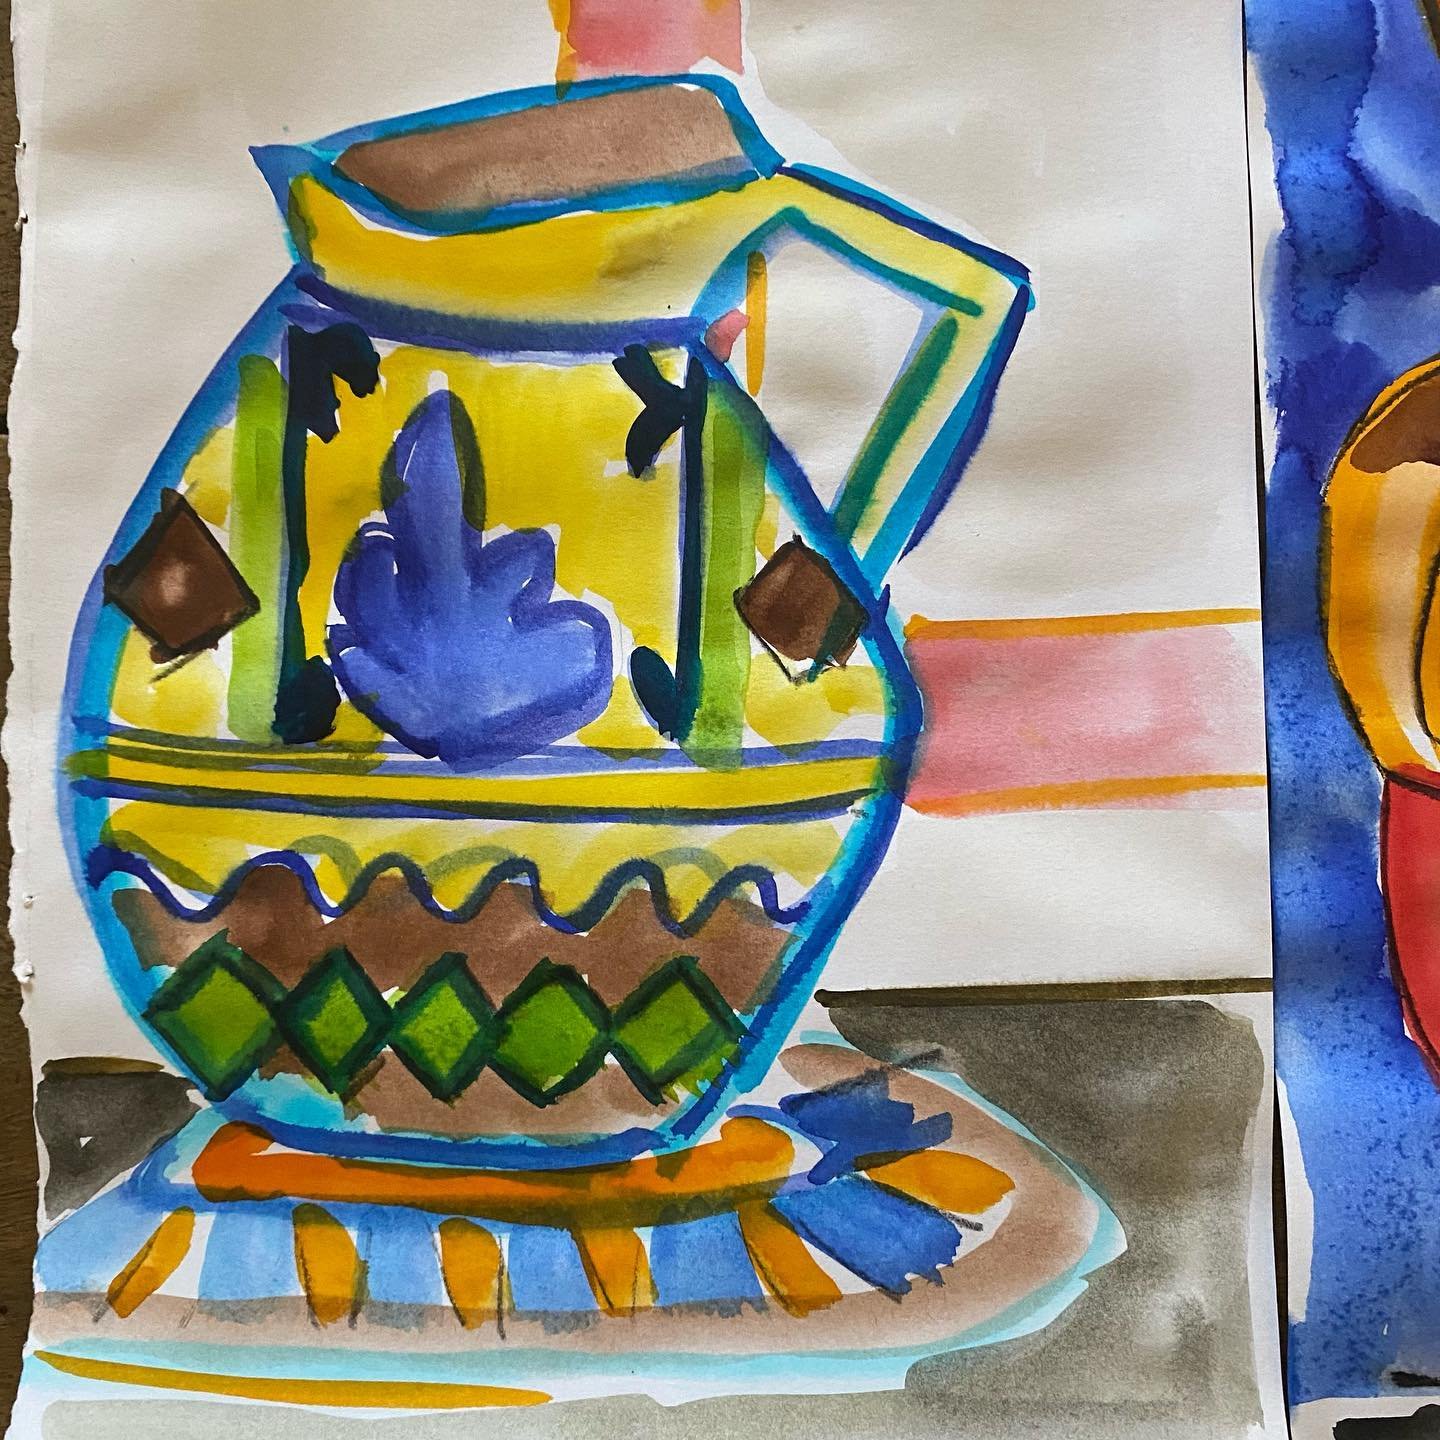 On holiday&hellip; a bit of sketching&hellip;vessels all around.

#fwdd 
#drawingdate 
#vessels 
#pots
#ilovecolour 
#colourinart 
#drawingday
#expressivedrawings 
#liztiranti 
#liztirantiartist 
#inspiredmosaicsstudio 
#romanvessels
#sculpturedesign